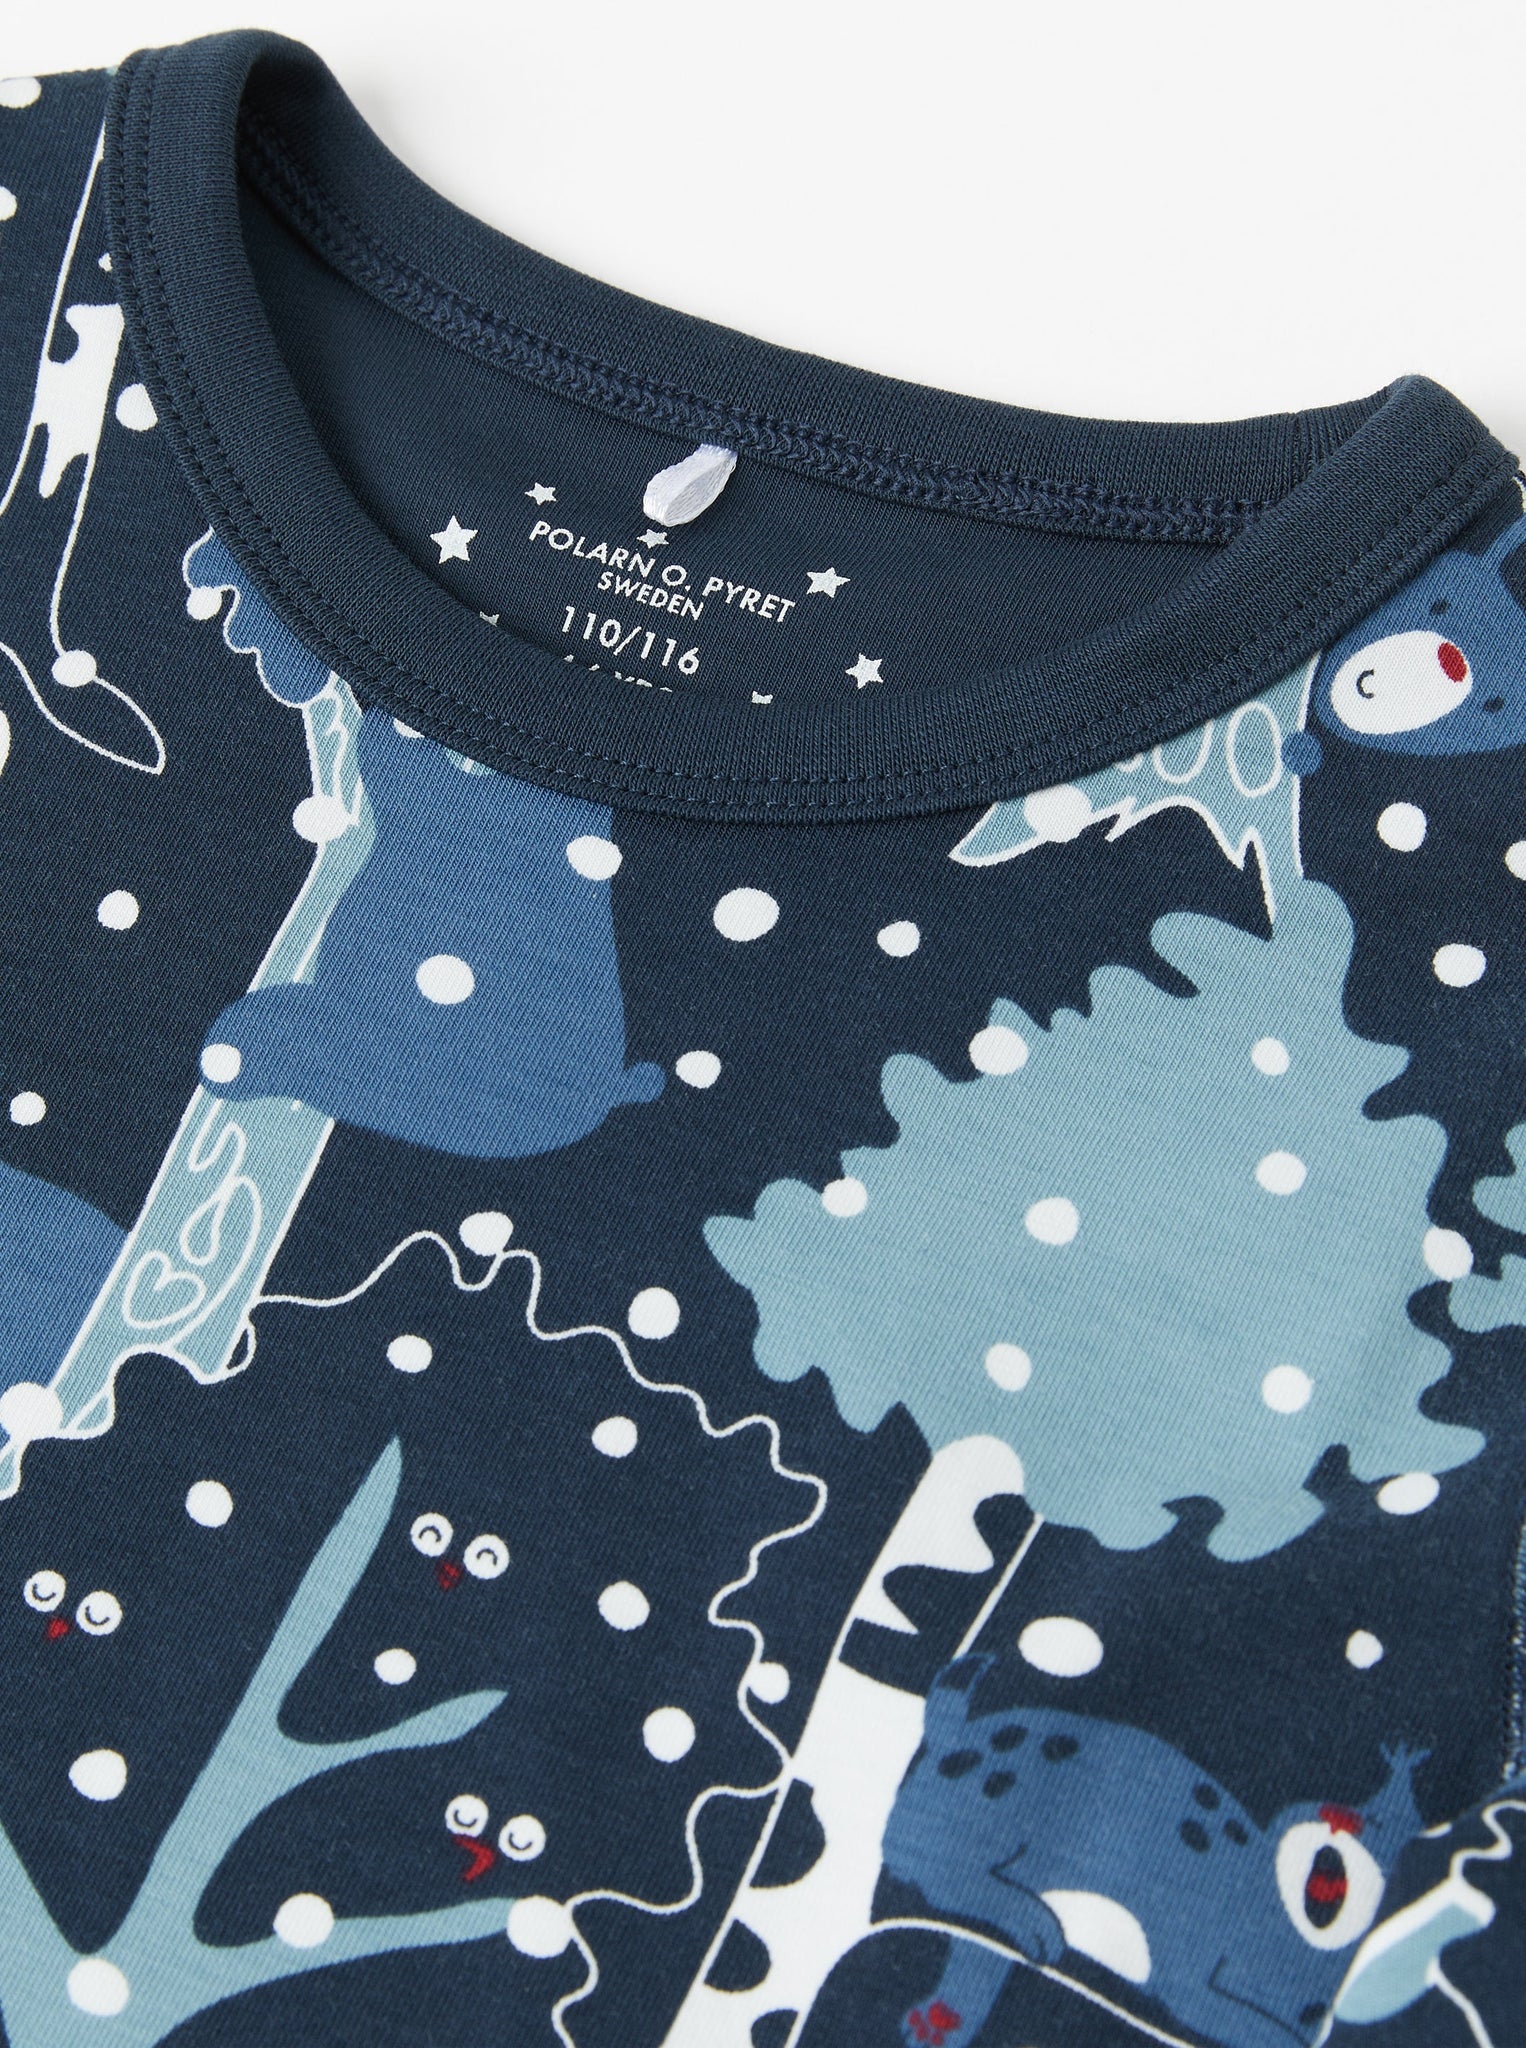 Organic Cotton Nordic Kids Pyjamas from the Polarn O. Pyret kidswear collection. Nordic kids clothes made from sustainable sources.